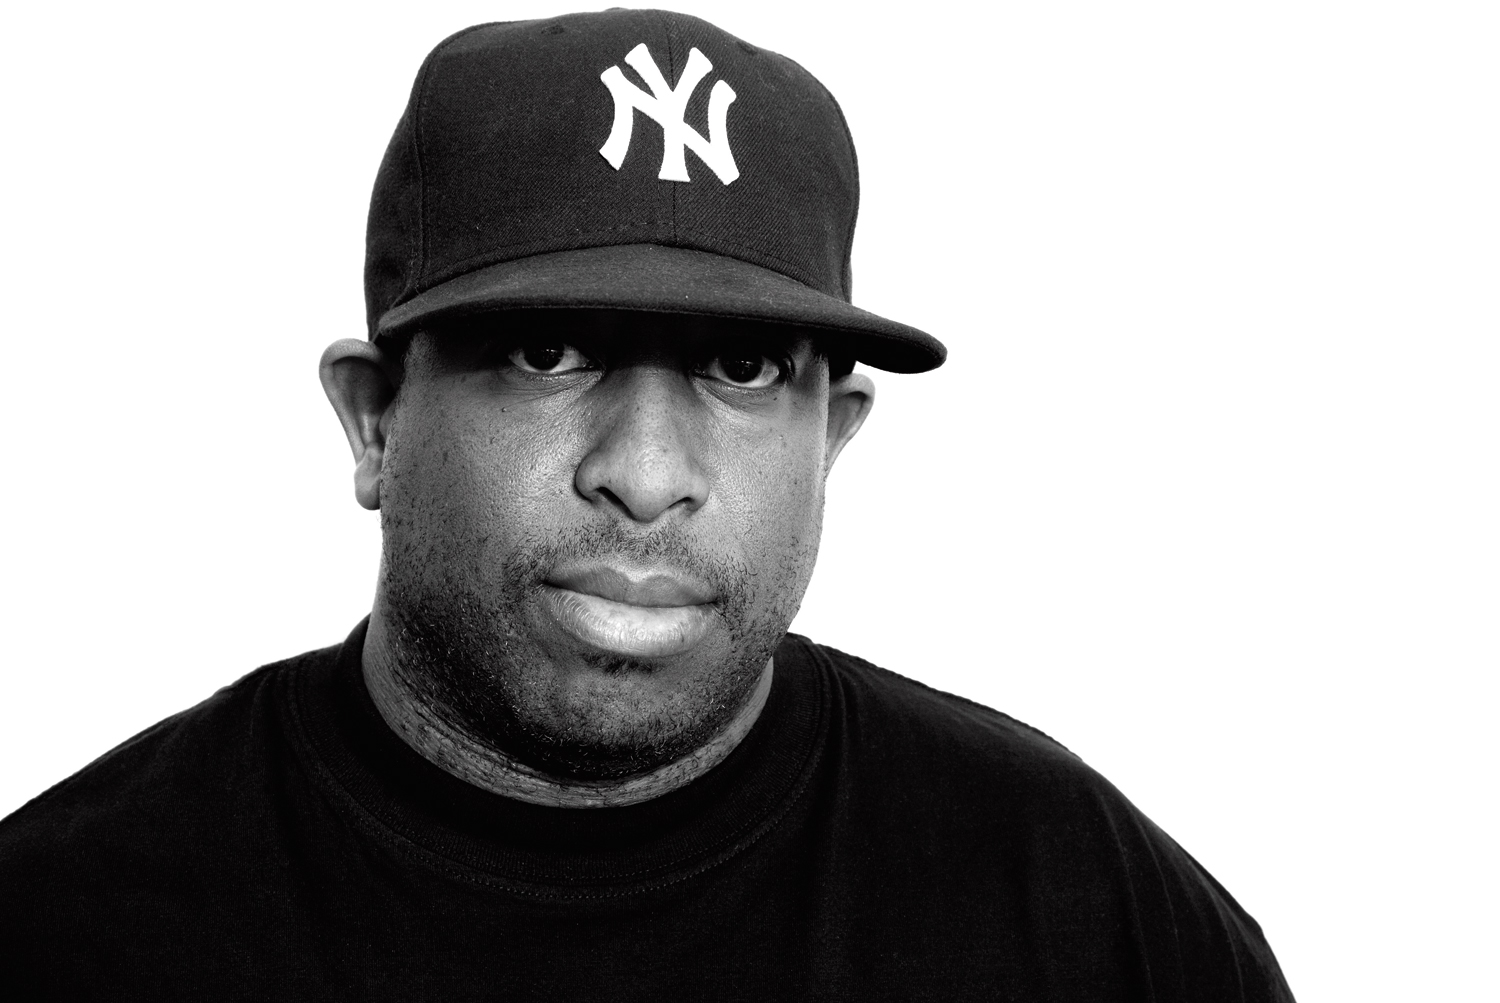 DJ Premier and special guests to play Arts Club Liverpool